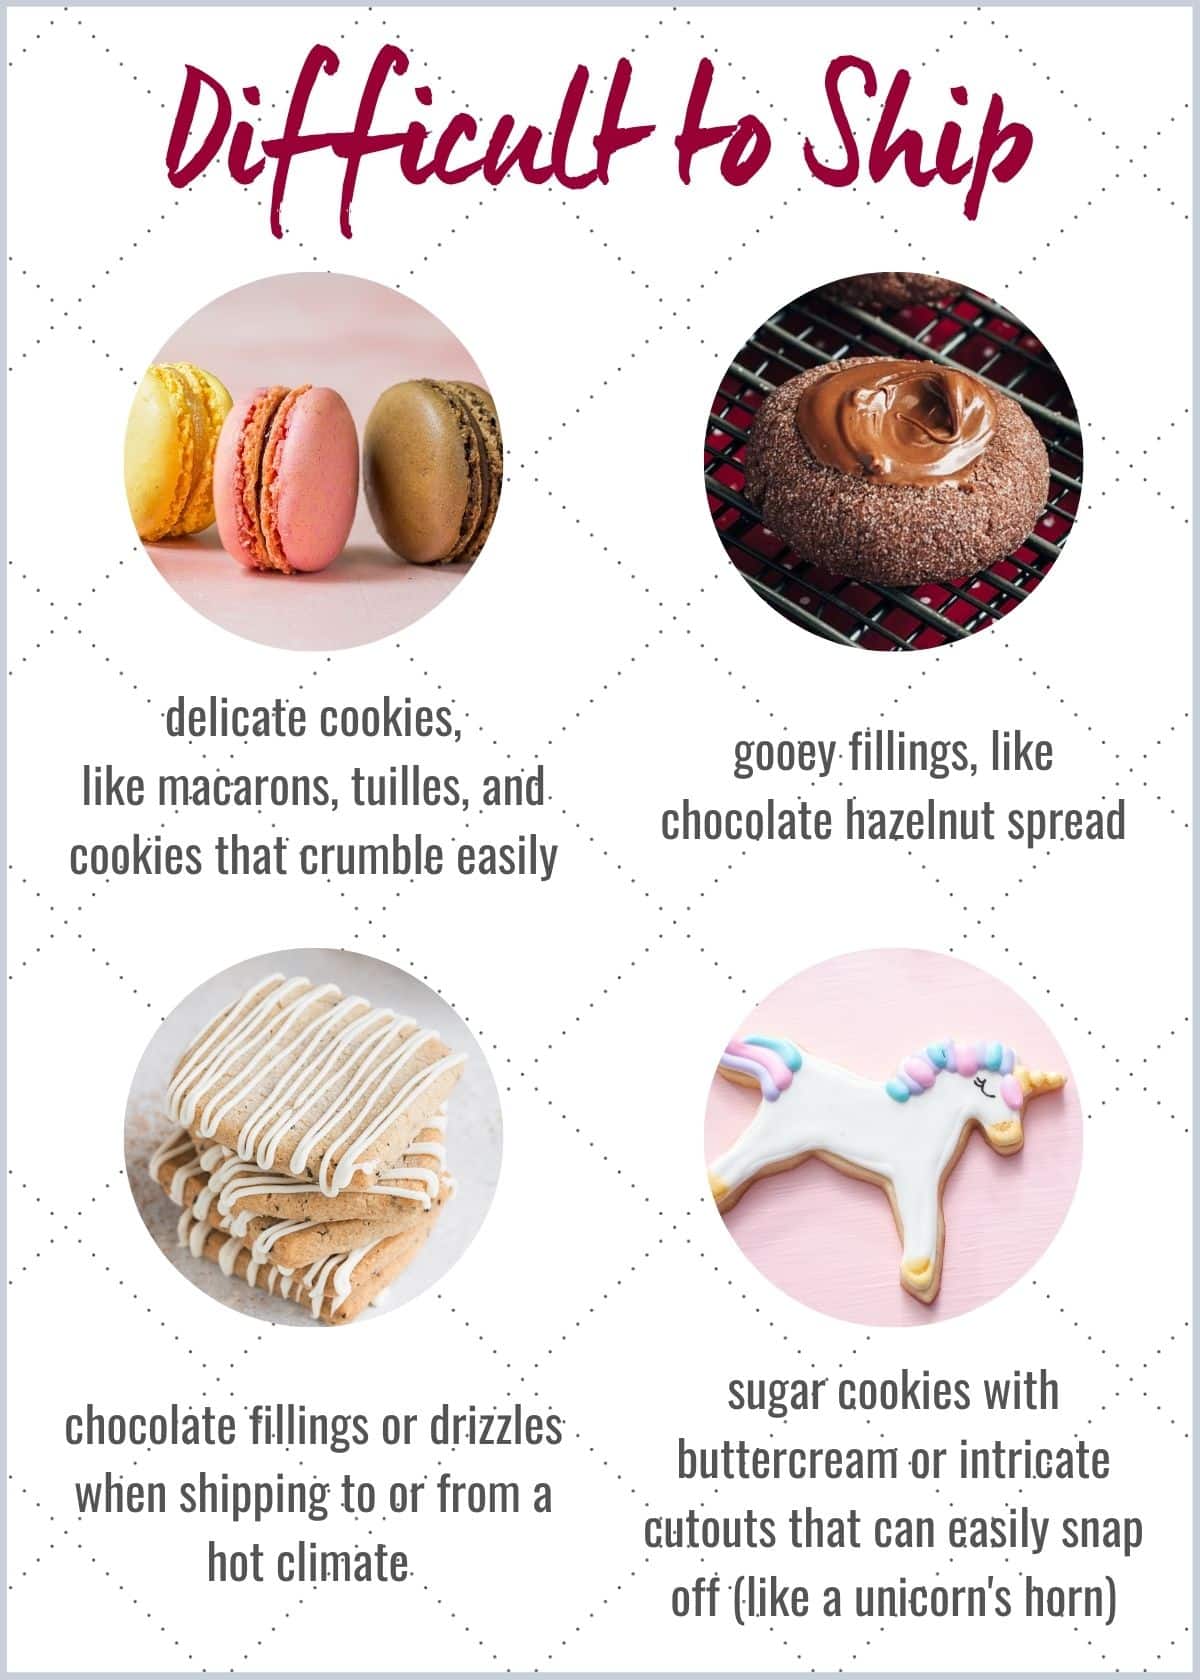 Infographic showing pictures of 4 difficult to ship cookies: macarons, chocolate filled thumbprints, chocolate drizzled shortbread, and a unicorn cutout cookie